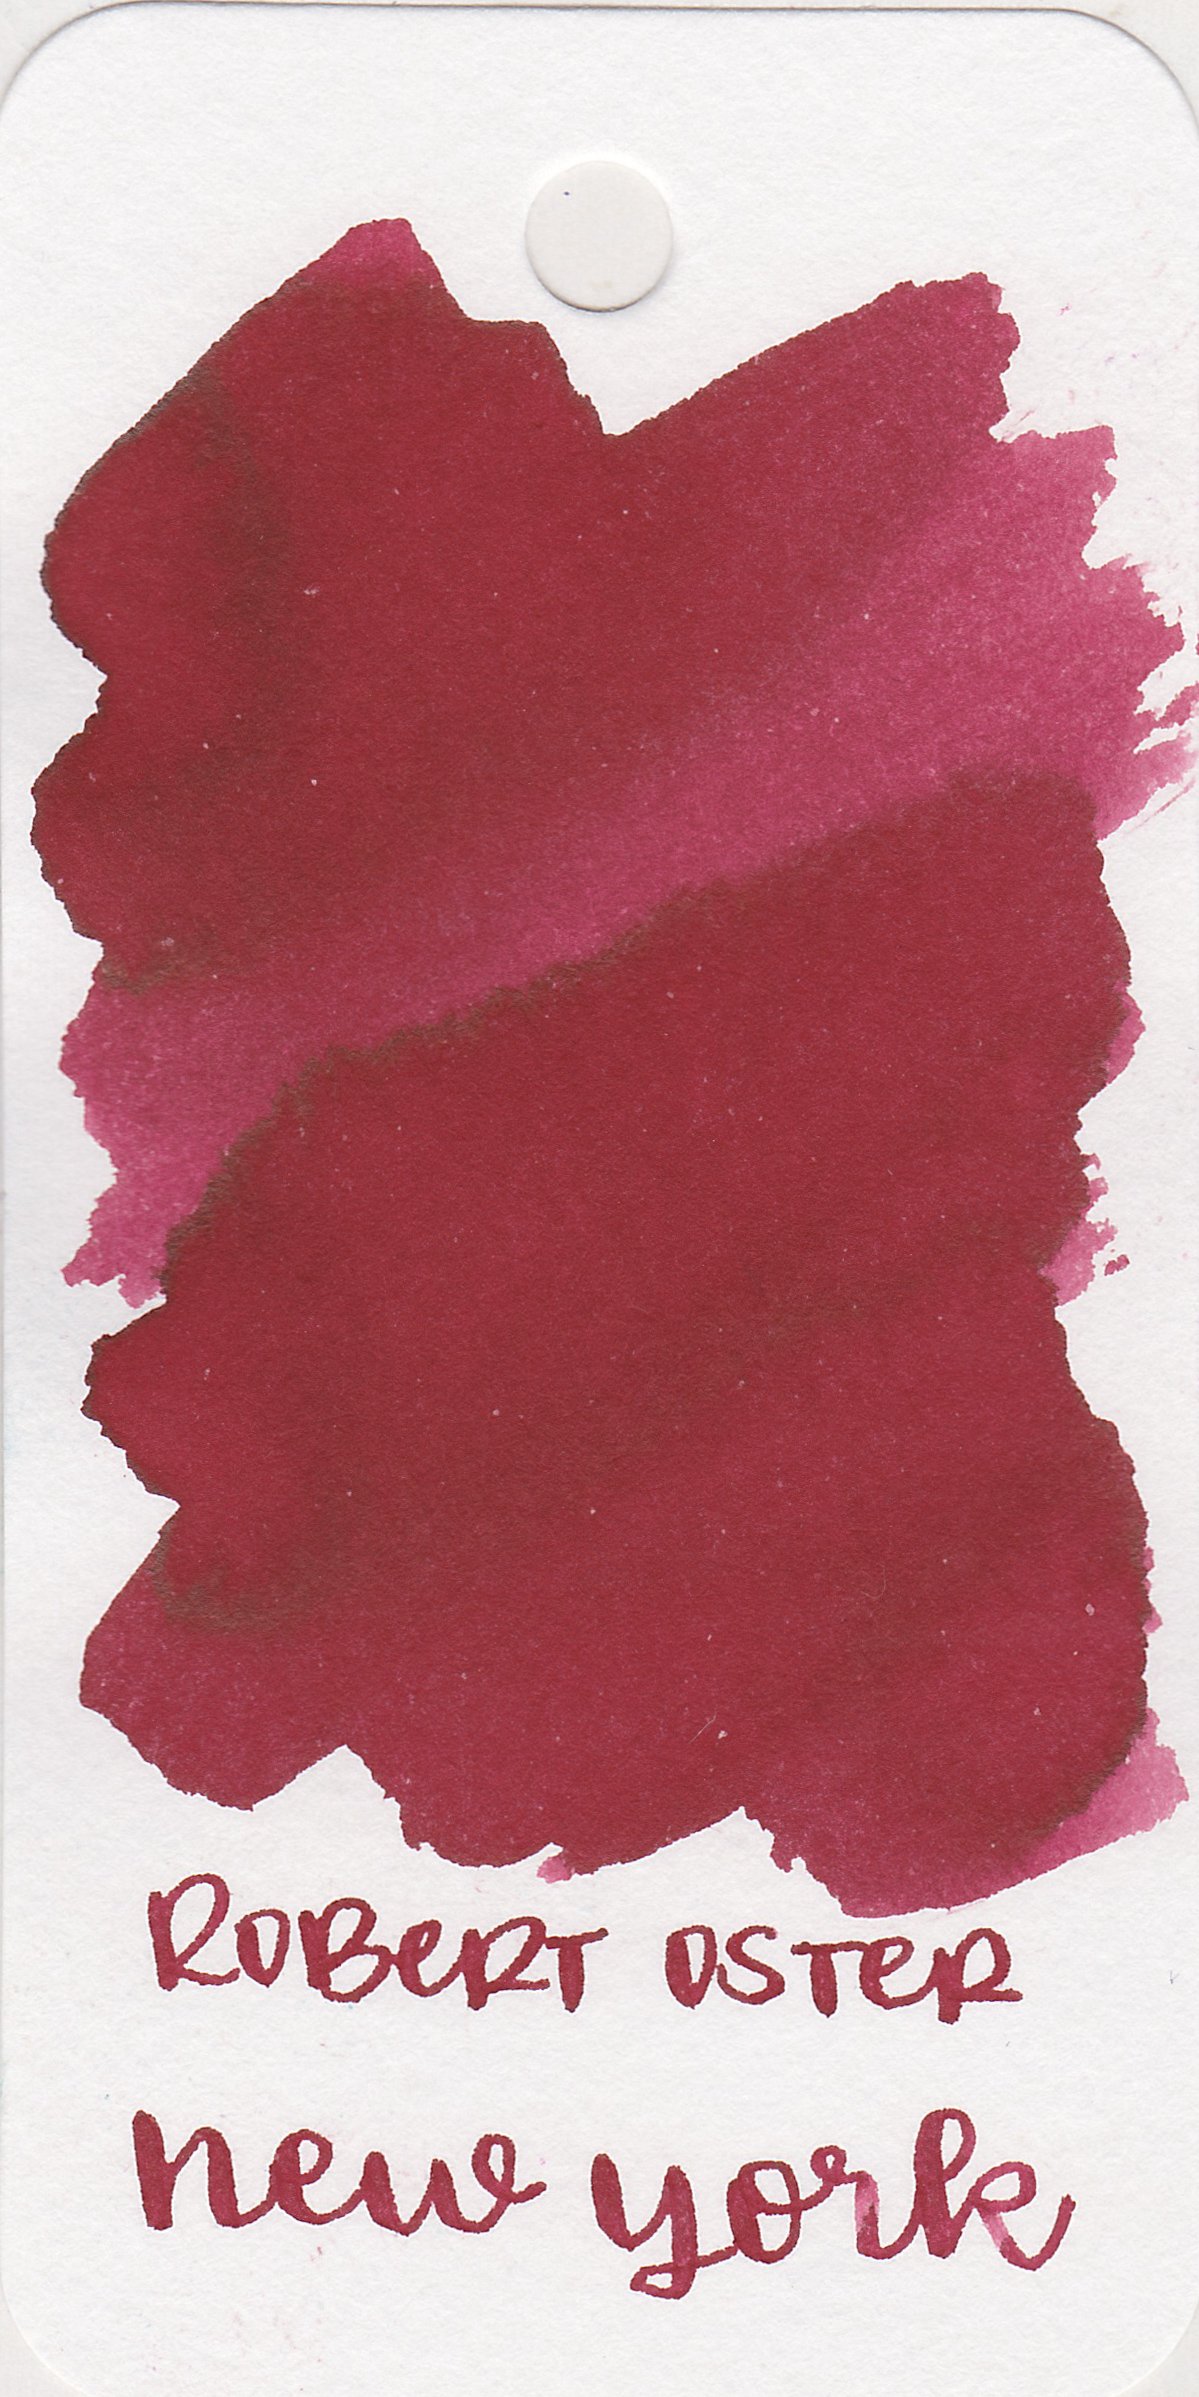 Ink Review #1965: Robert Oster New York — Mountain of Ink